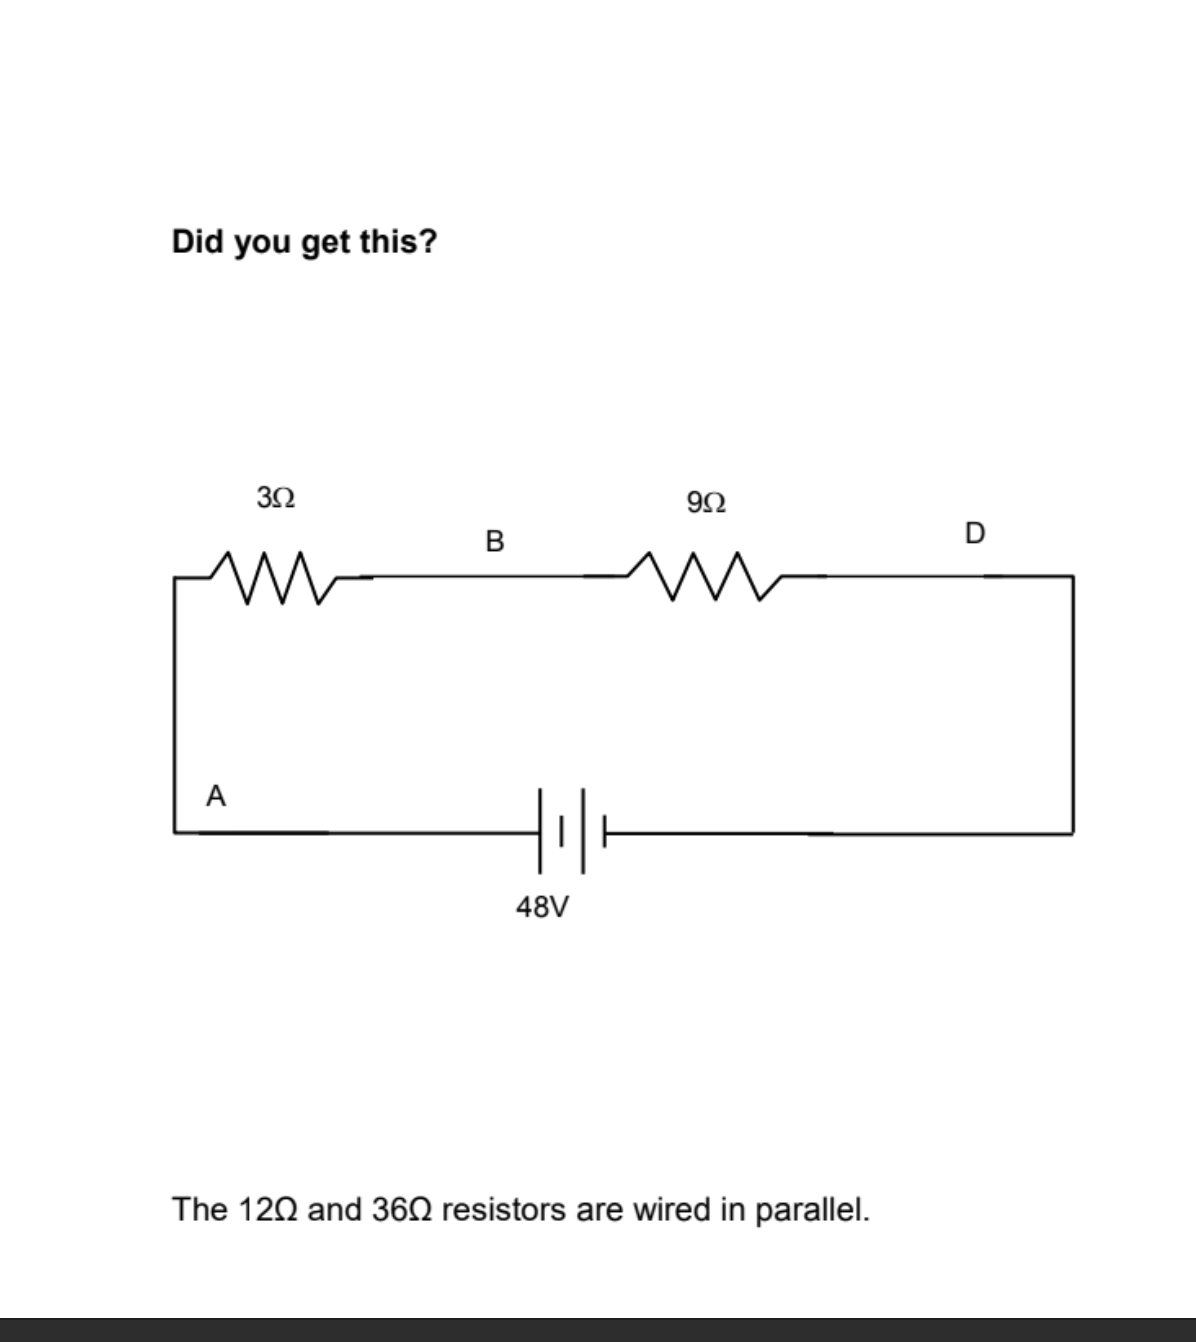 Did you get this?
92
B
D
A
48V
The 120 and 362 resistors are wired in parallel.
